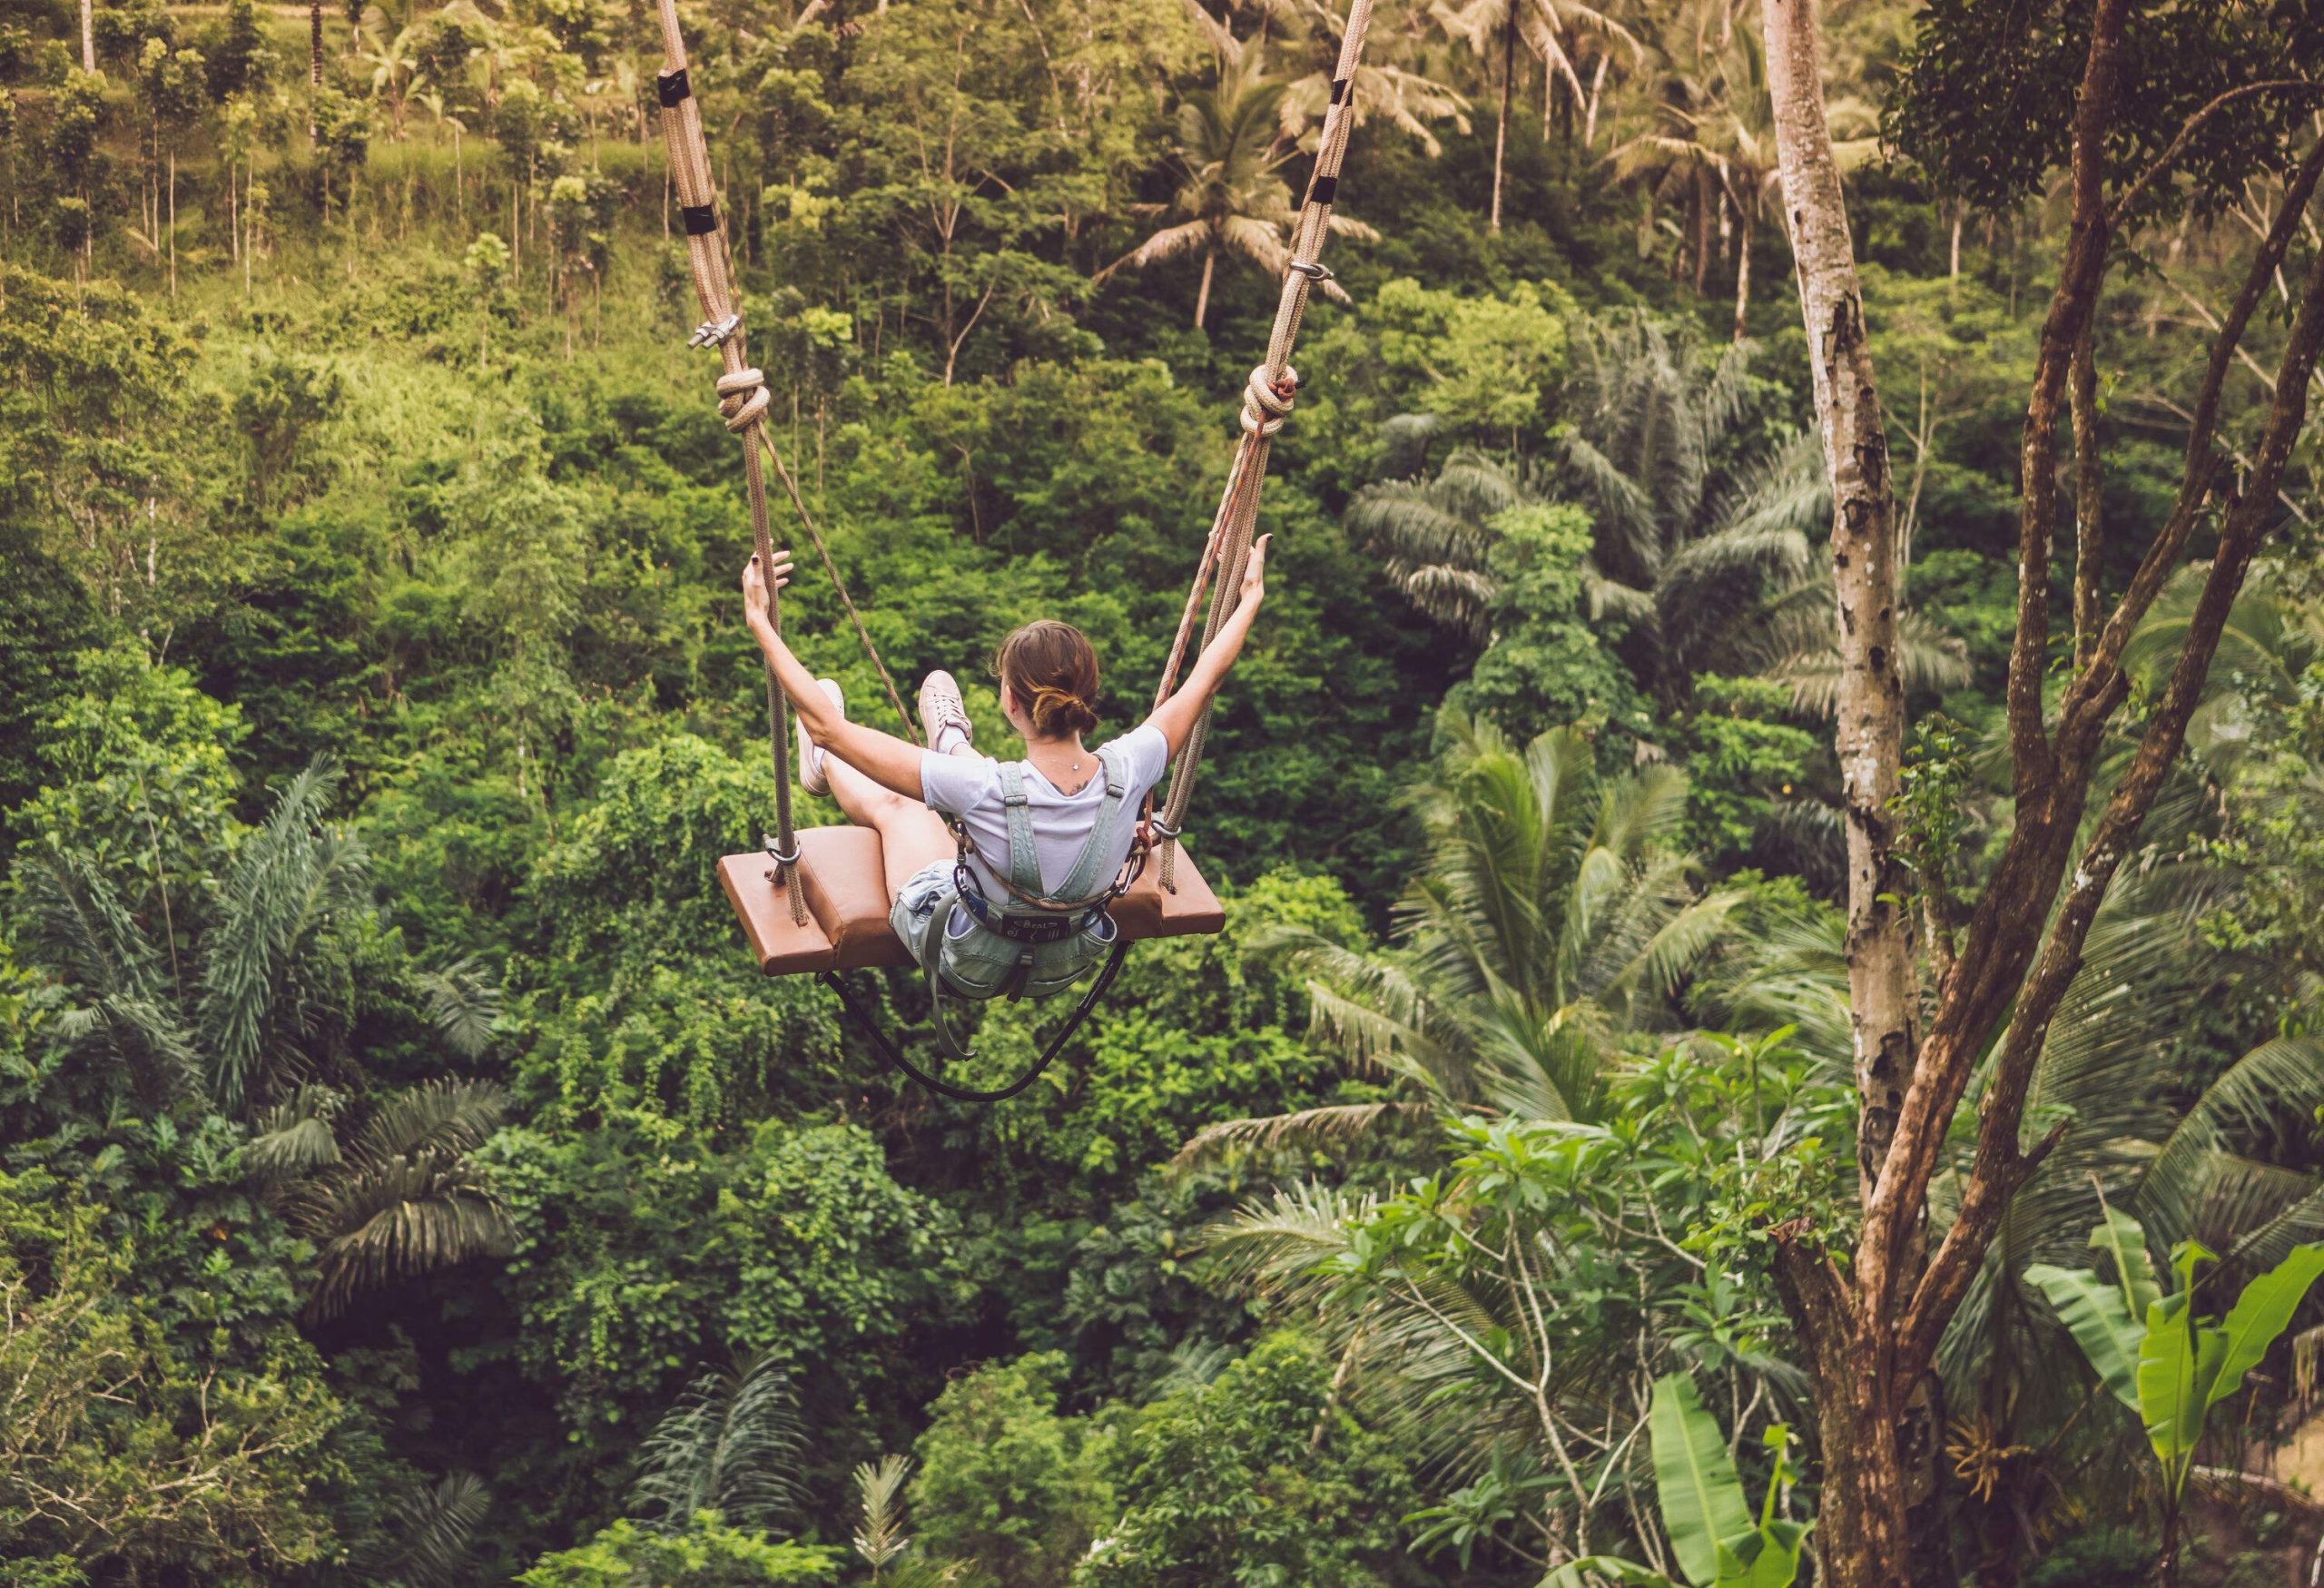 A female harnessed on a hanging swing of a cliff in the middle of the forest.